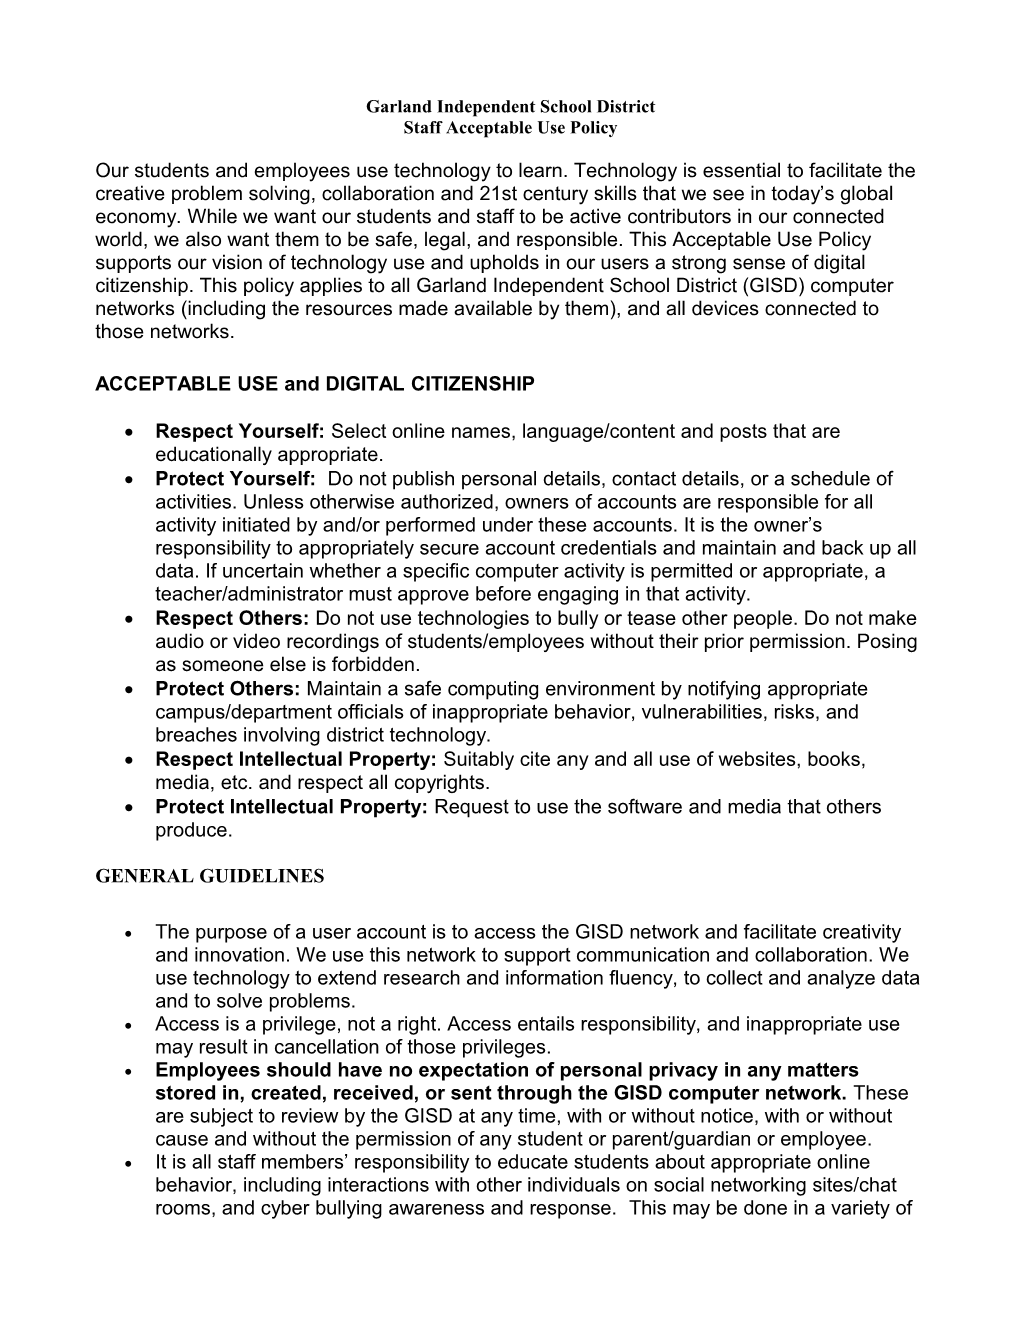 LISD Technology Guidelines for Staff October 2003 ELECTRONIC COMMUNICATION and DATA MANAGEMENT